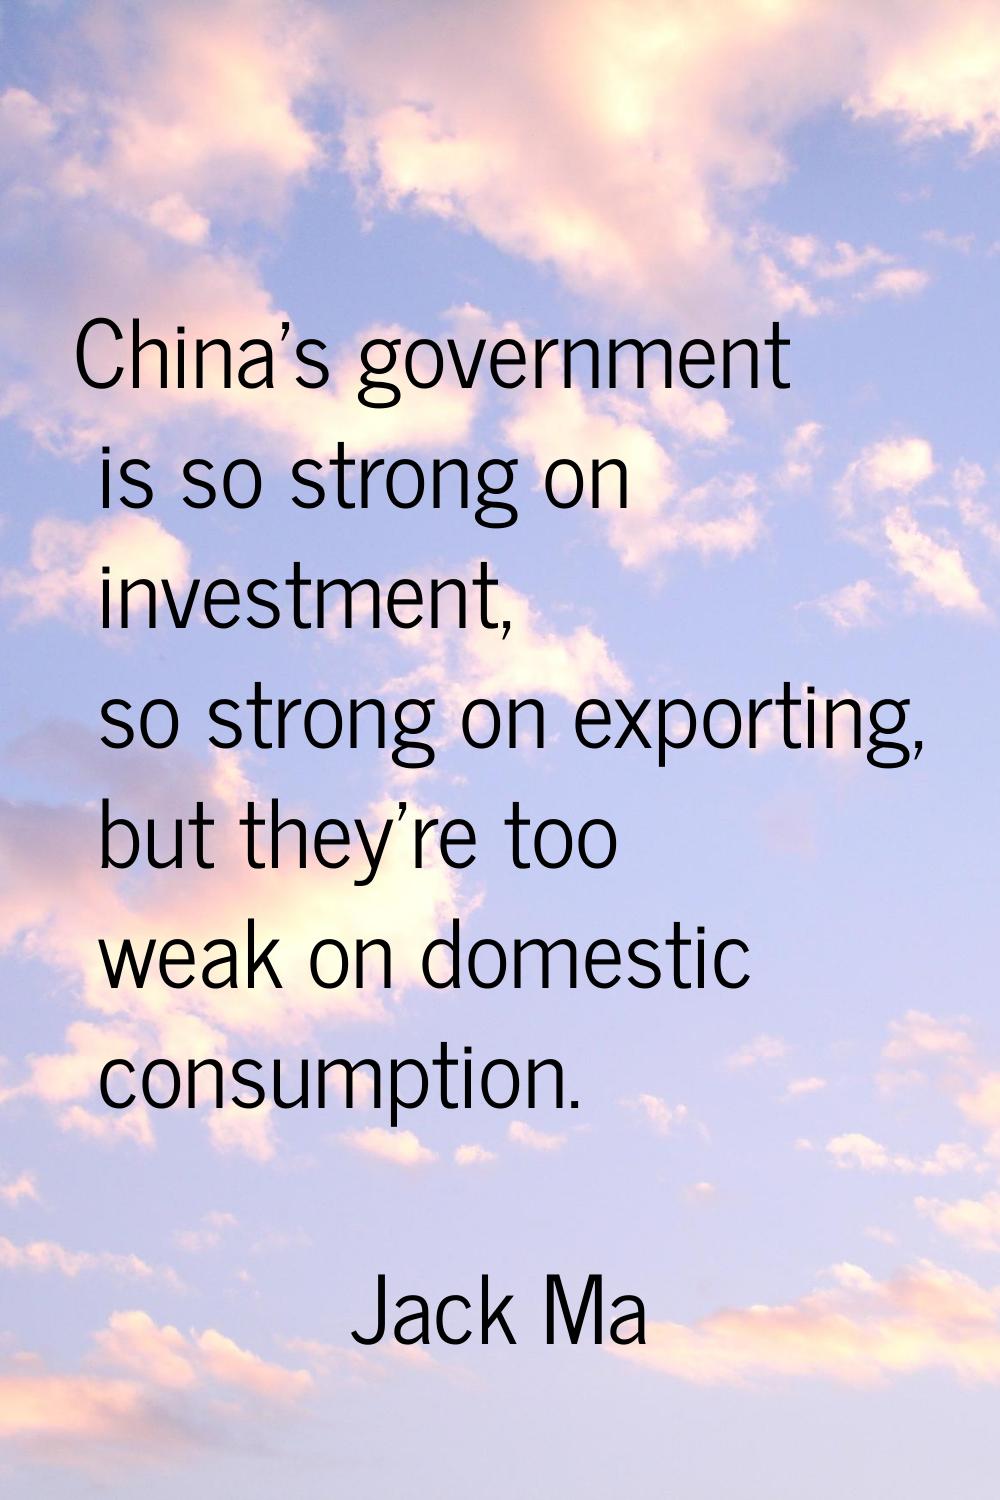 China's government is so strong on investment, so strong on exporting, but they're too weak on dome